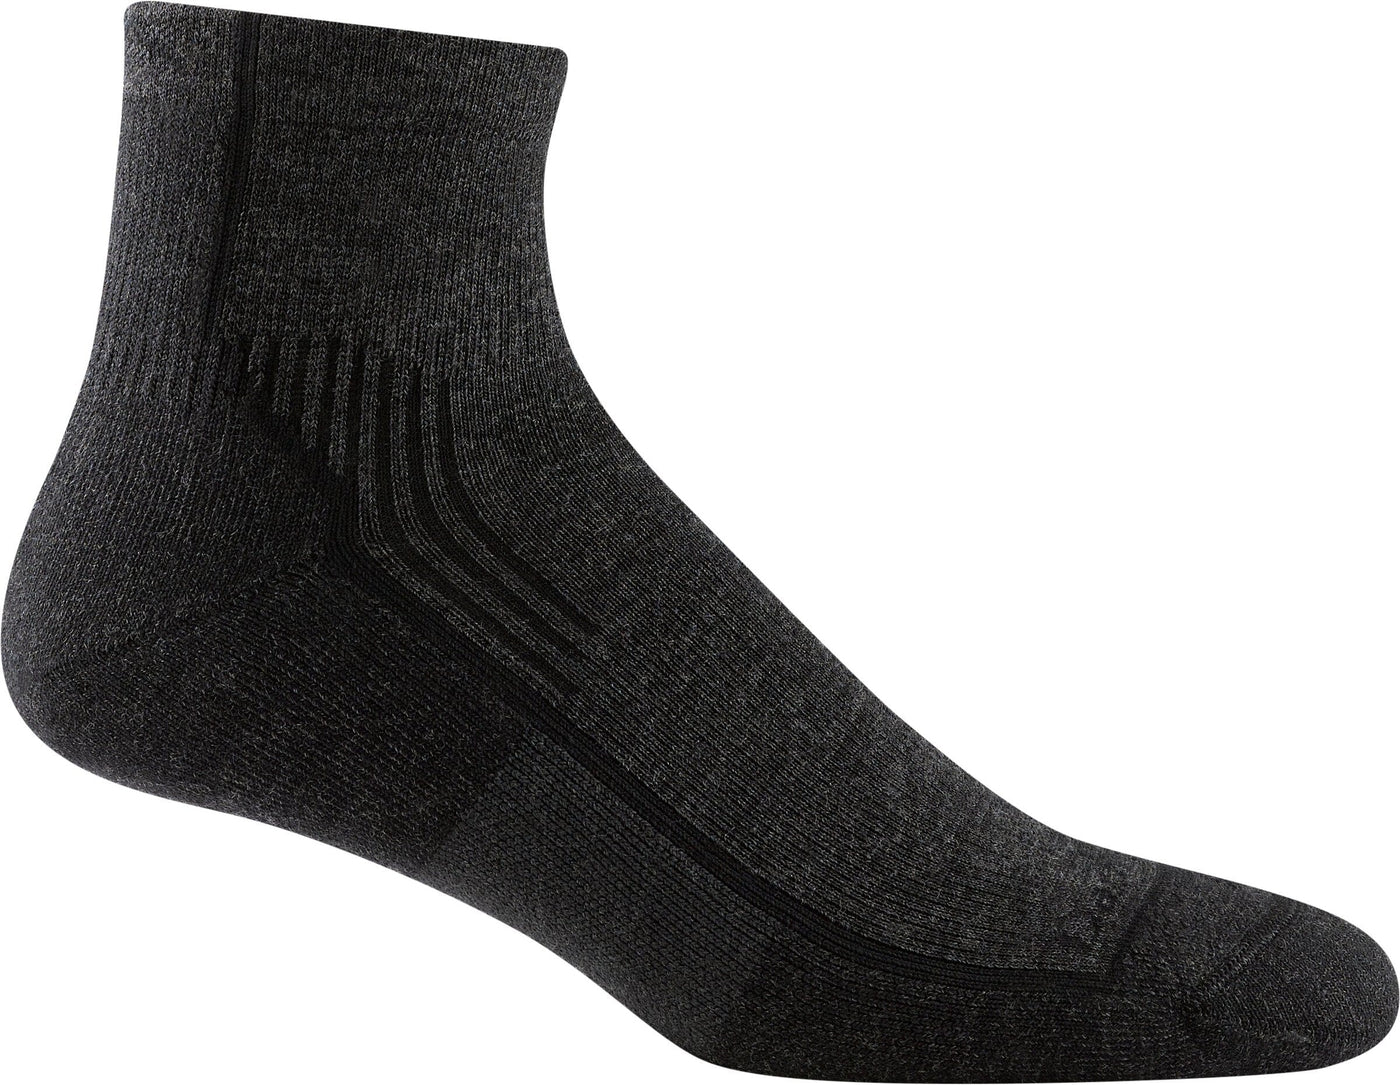 Hiker 1/4 Midweight With Cushion | Men's - Knock Your Socks Off